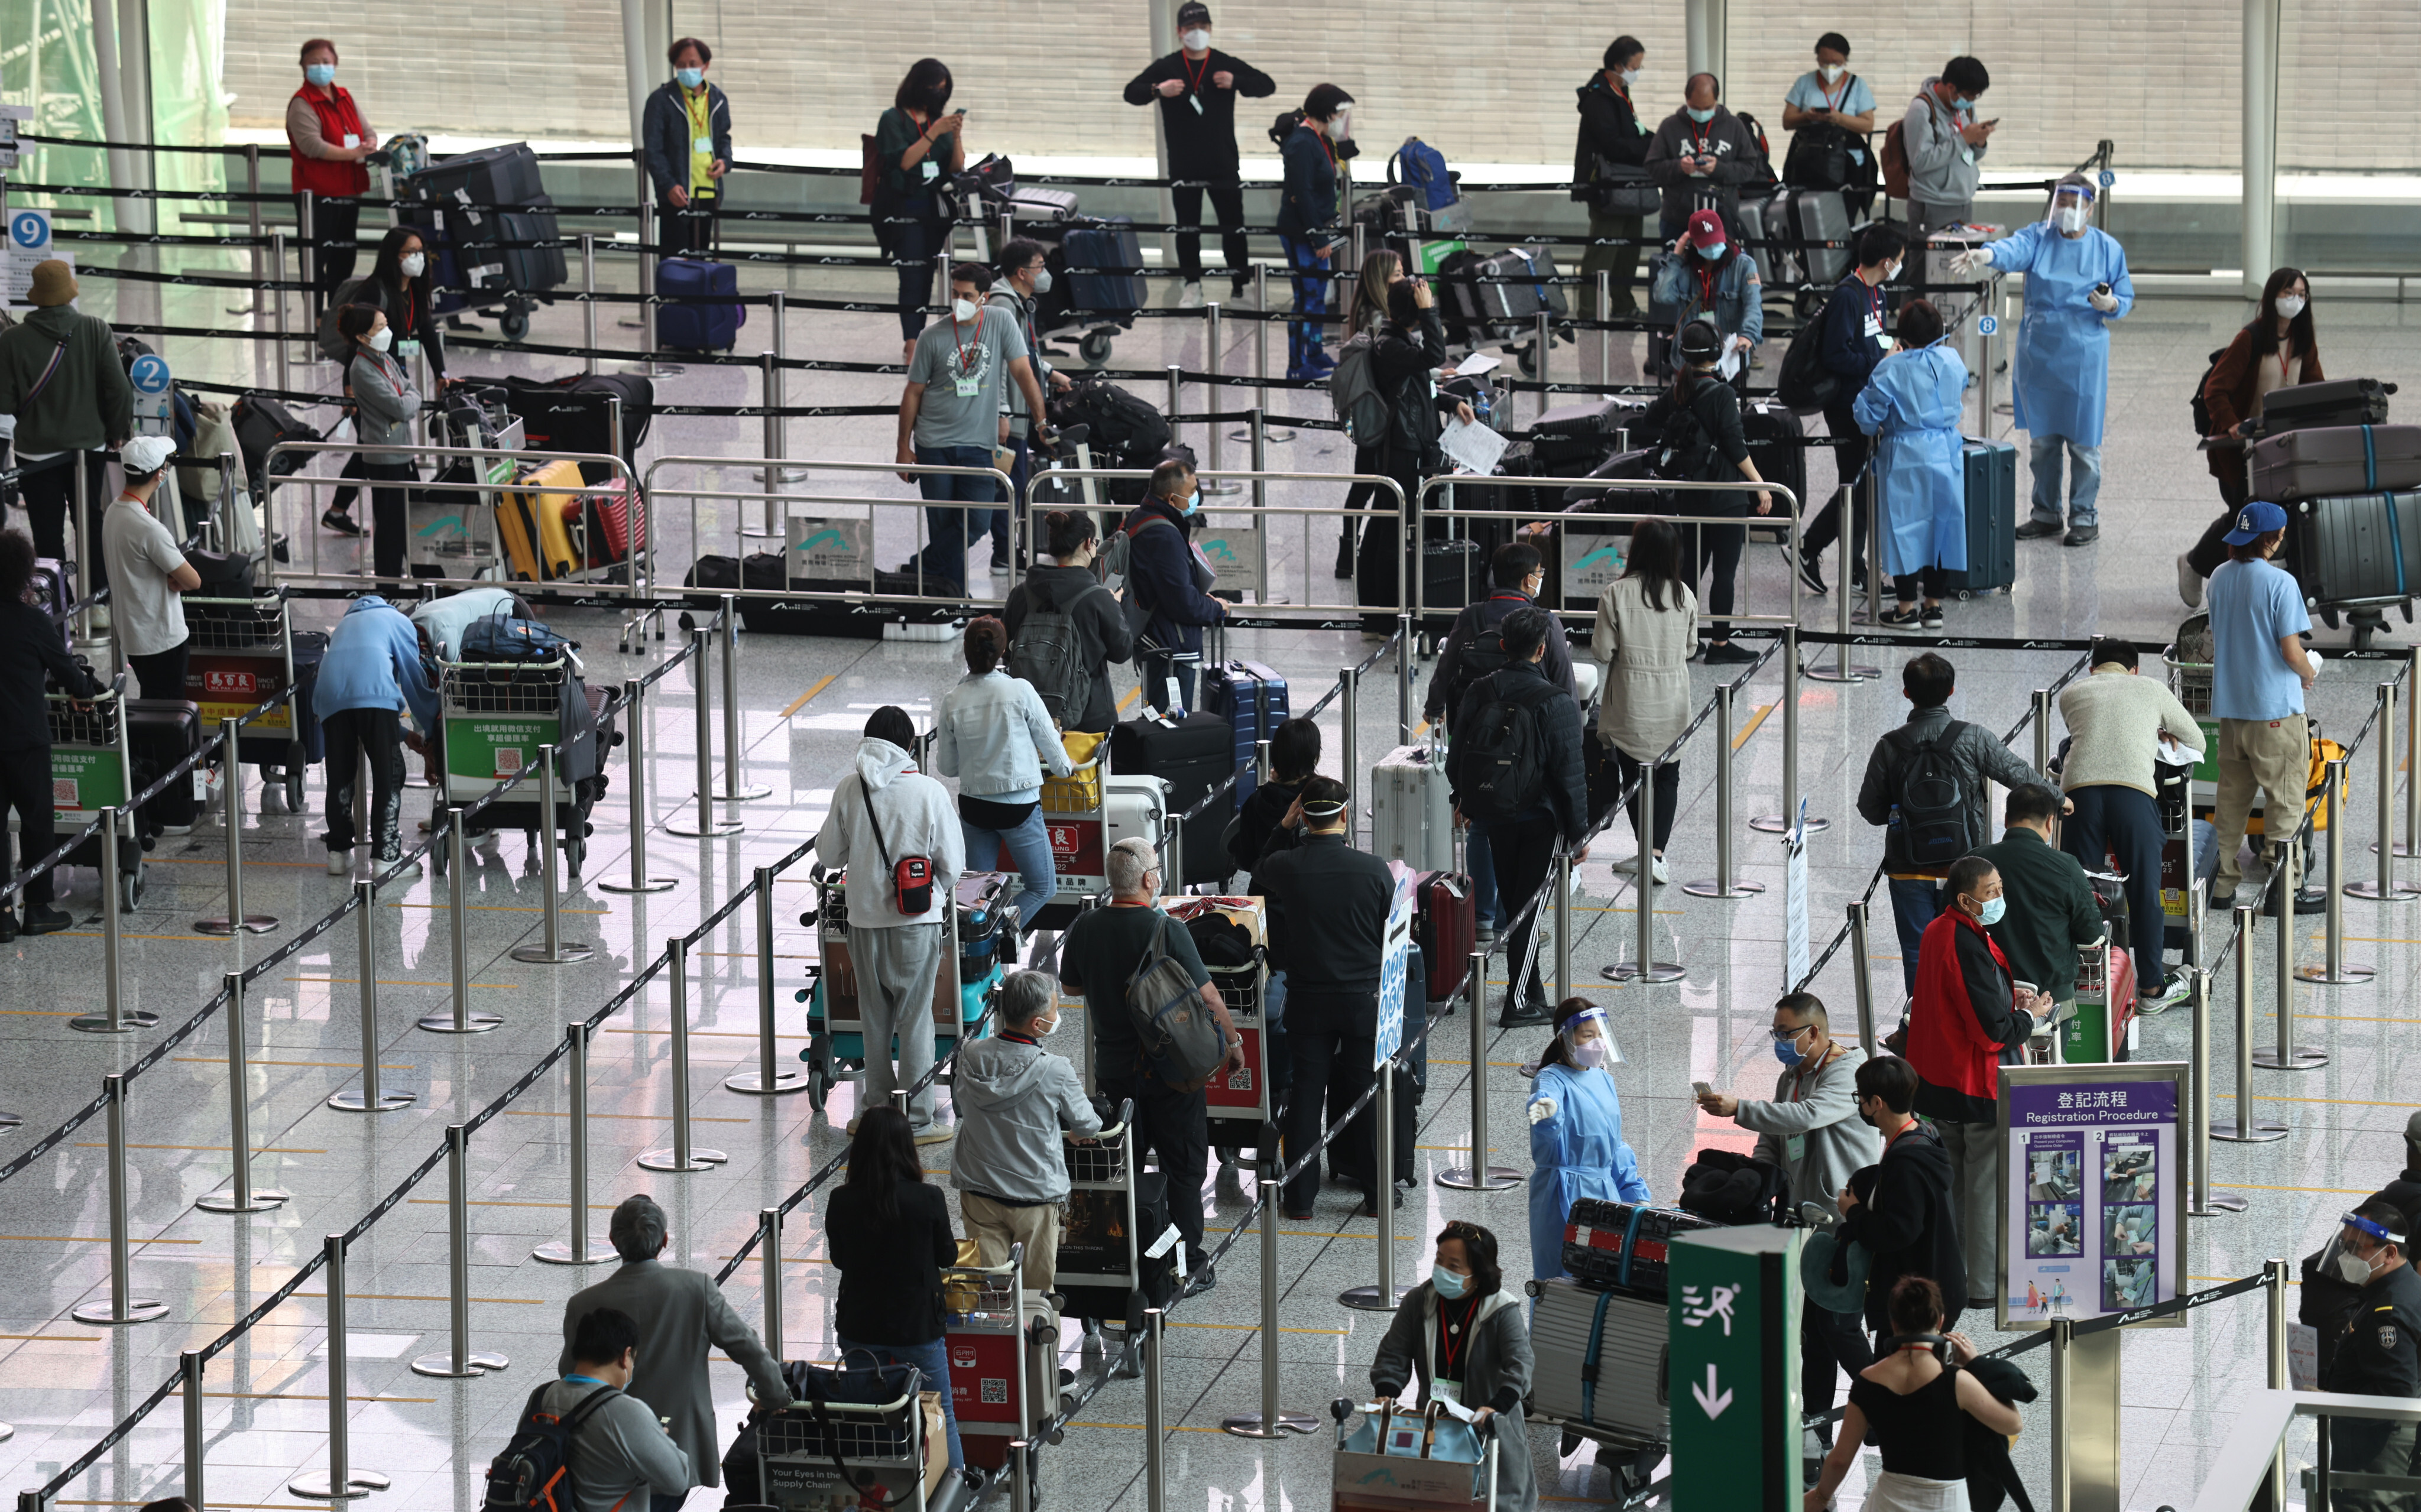 Passengers arriving at Hong Kong International Airport queue to take Covid-19 tests before heading to their quarantine hotels on May 3. More flights are expected to arrive after the government eased some travel restrictions. Photo: K.Y. Cheng